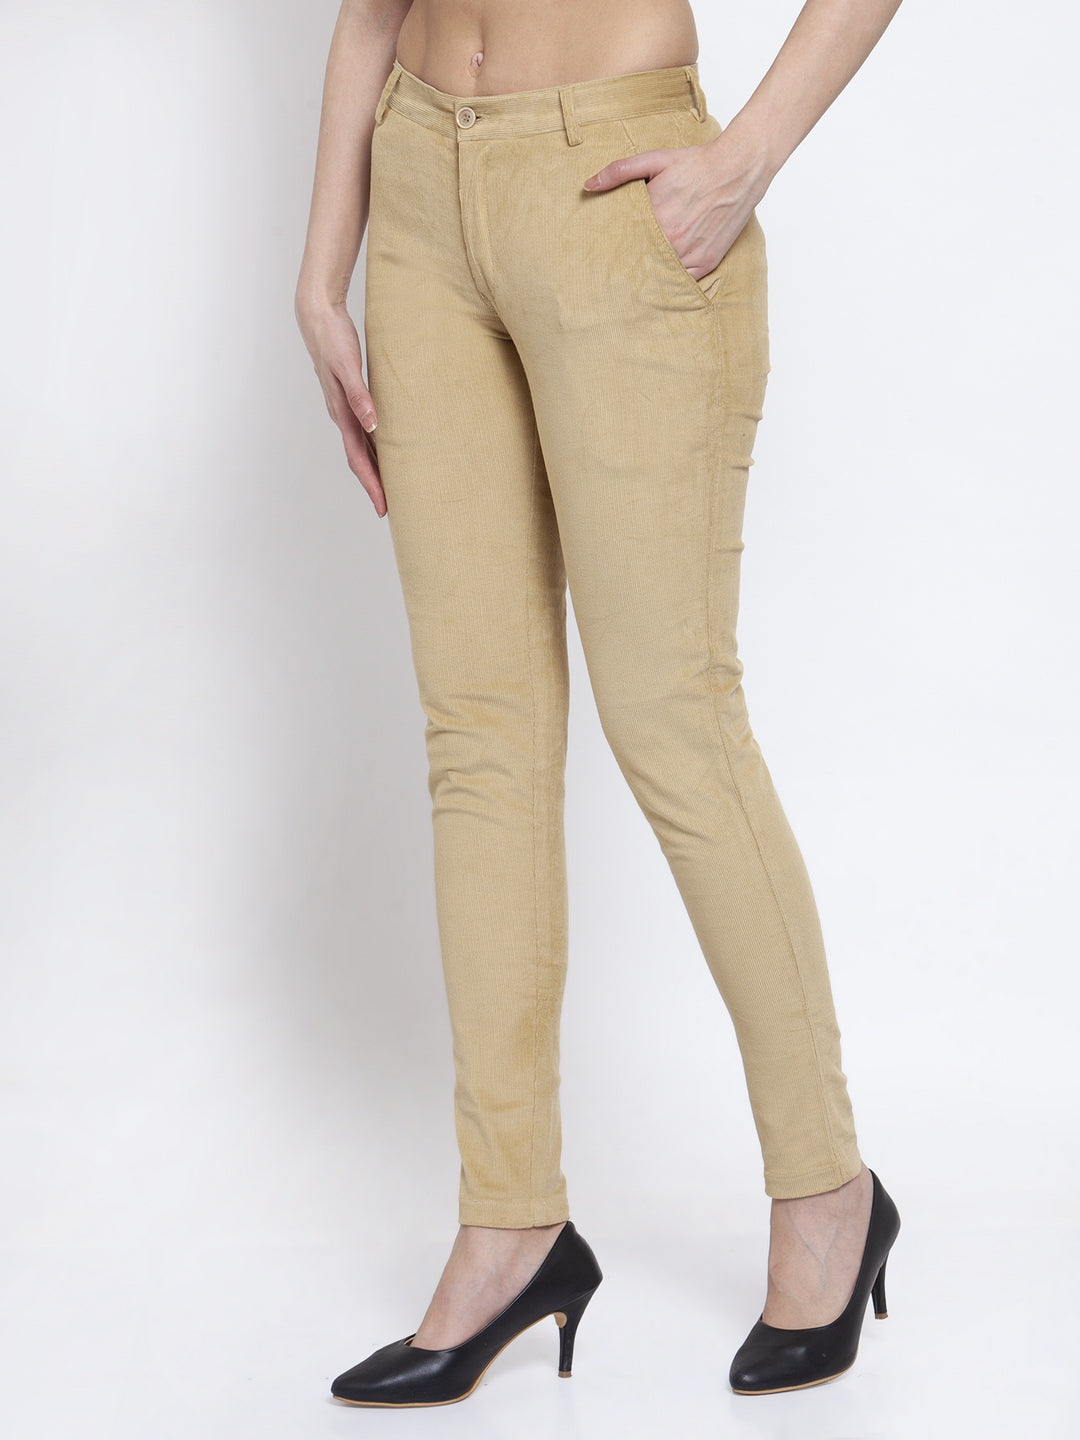 Buy Global Stitch Cotrise Pants for Women Mid Waist Wide Baggy Leg Jeans  Pants Fashion Trousers (26) Beige at Amazon.in